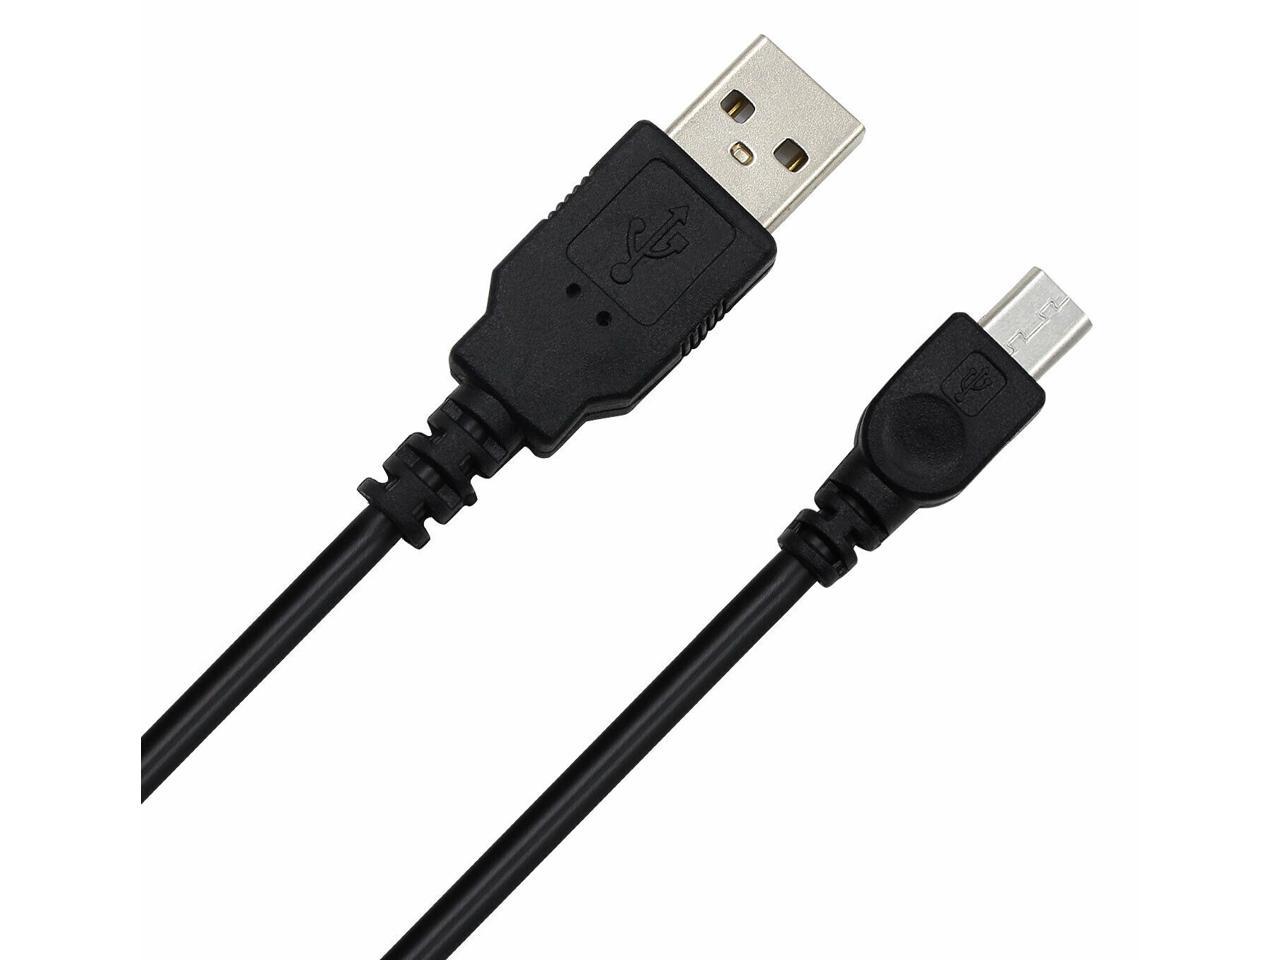 USB DC Power Charger Charging Cable Cord For Huion 420/H580 Table Digital Pen 